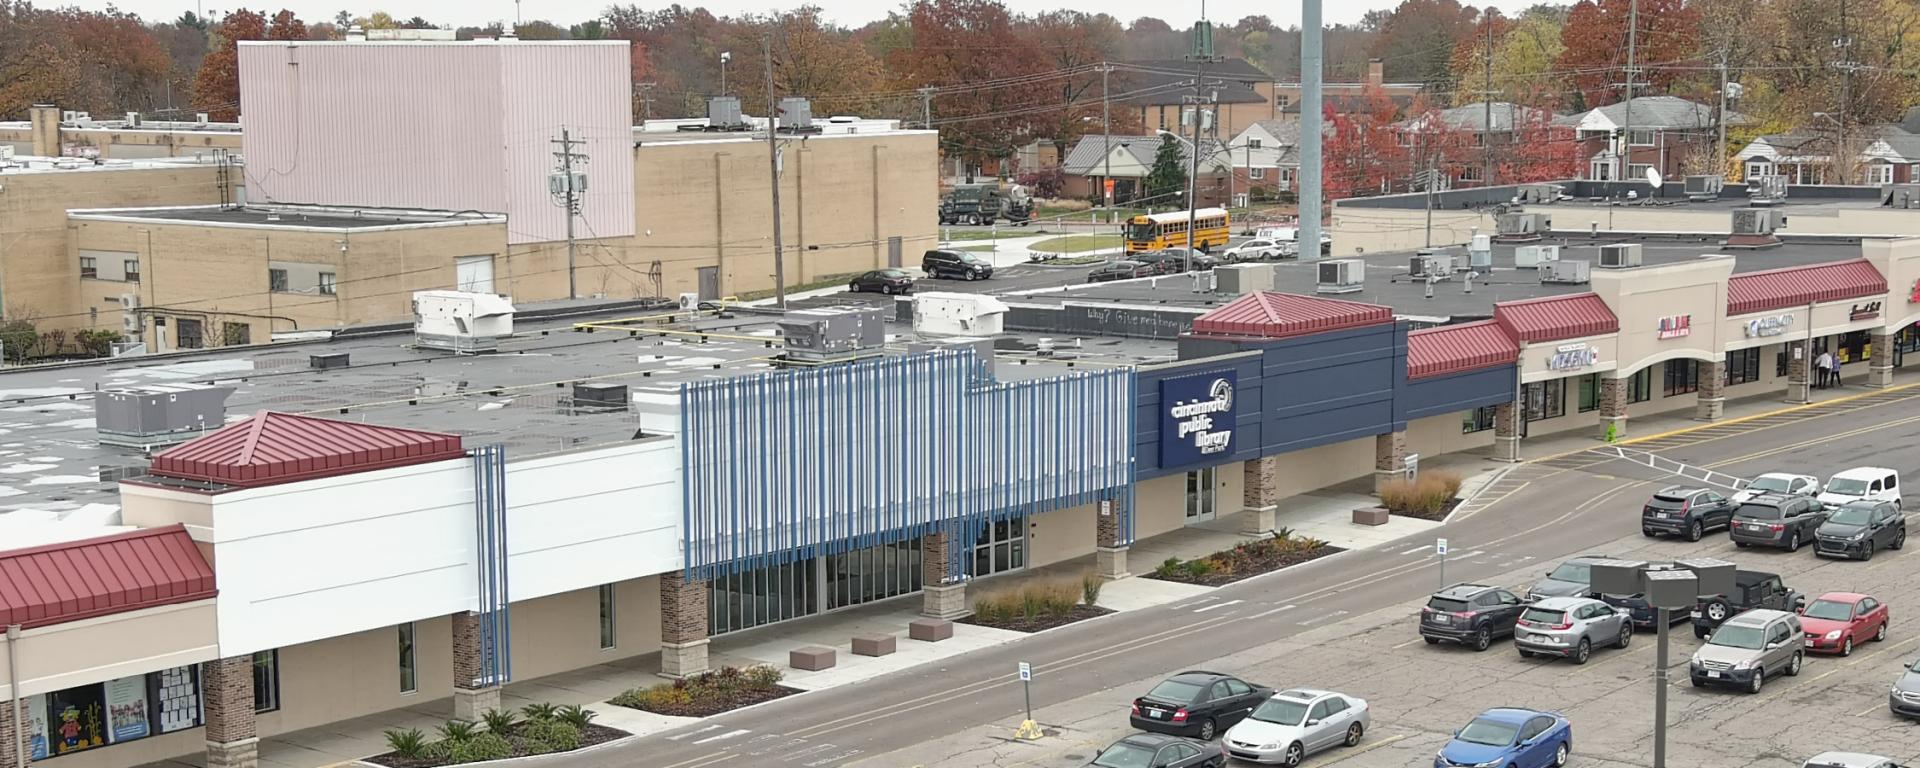 aerial photo of urban library in a strip mall and parking lot